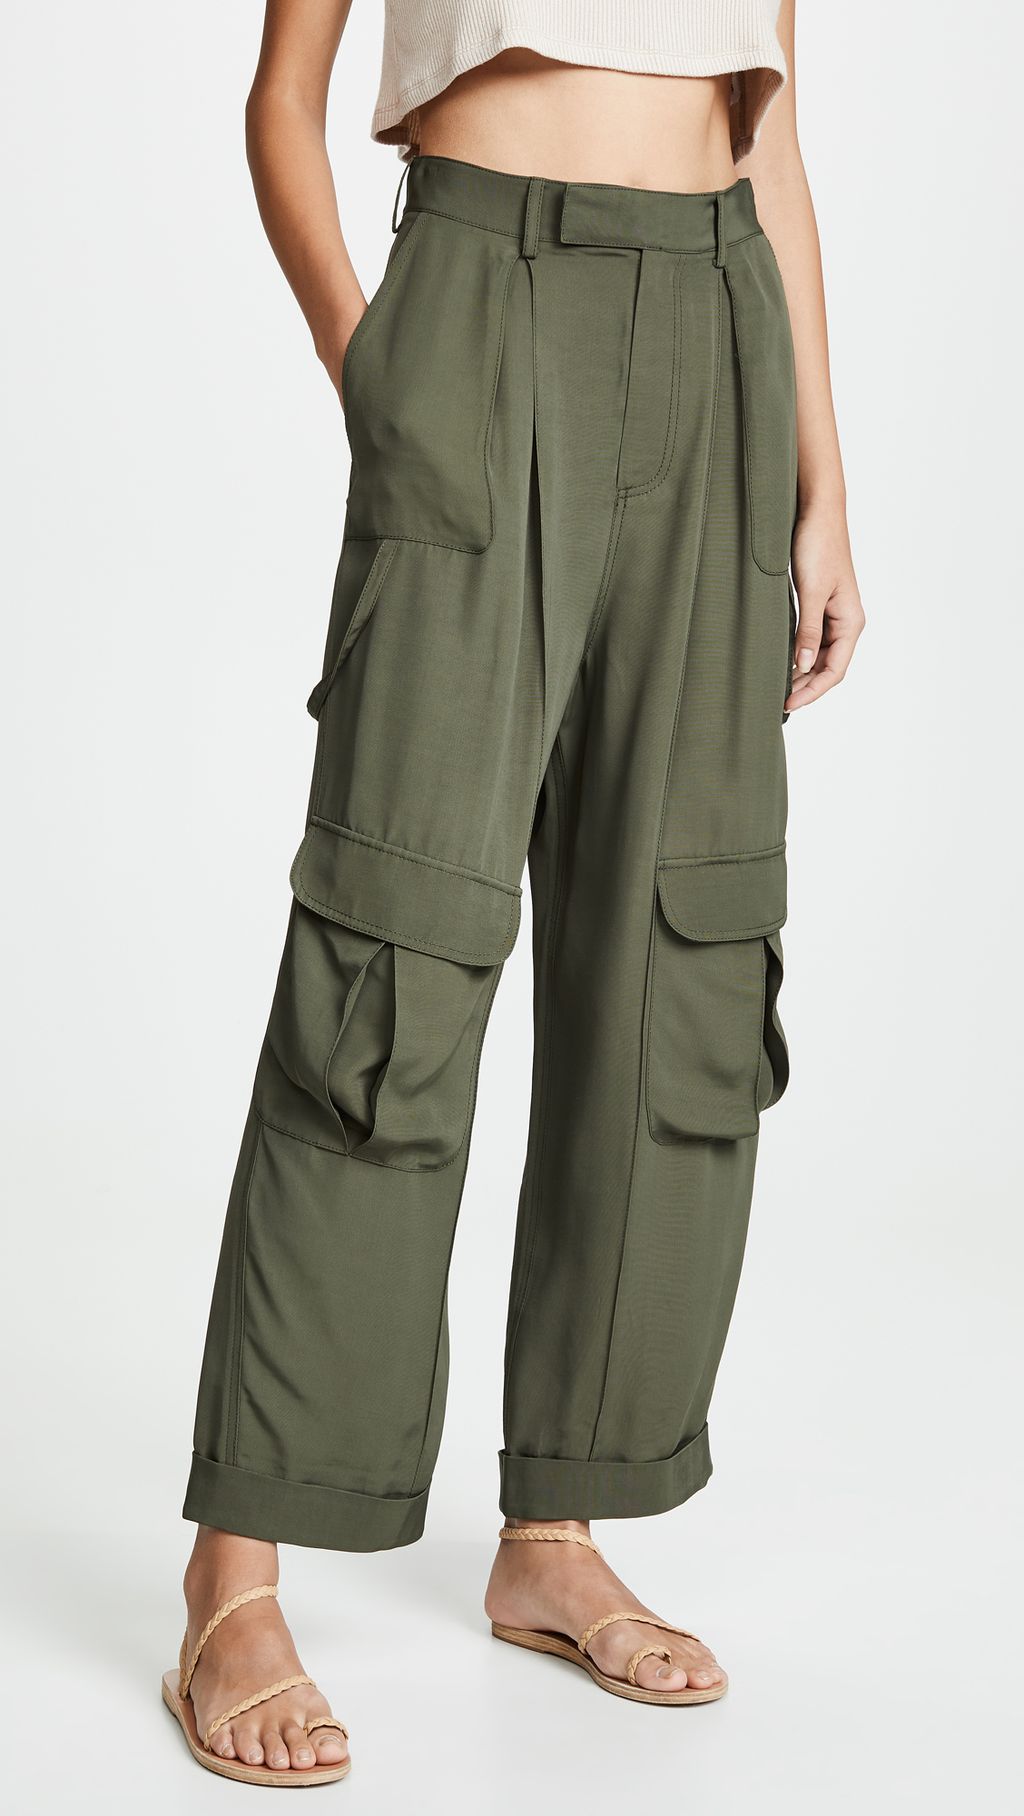 6 Cargo Pant Outfits That Are So Chic | Who What Wear